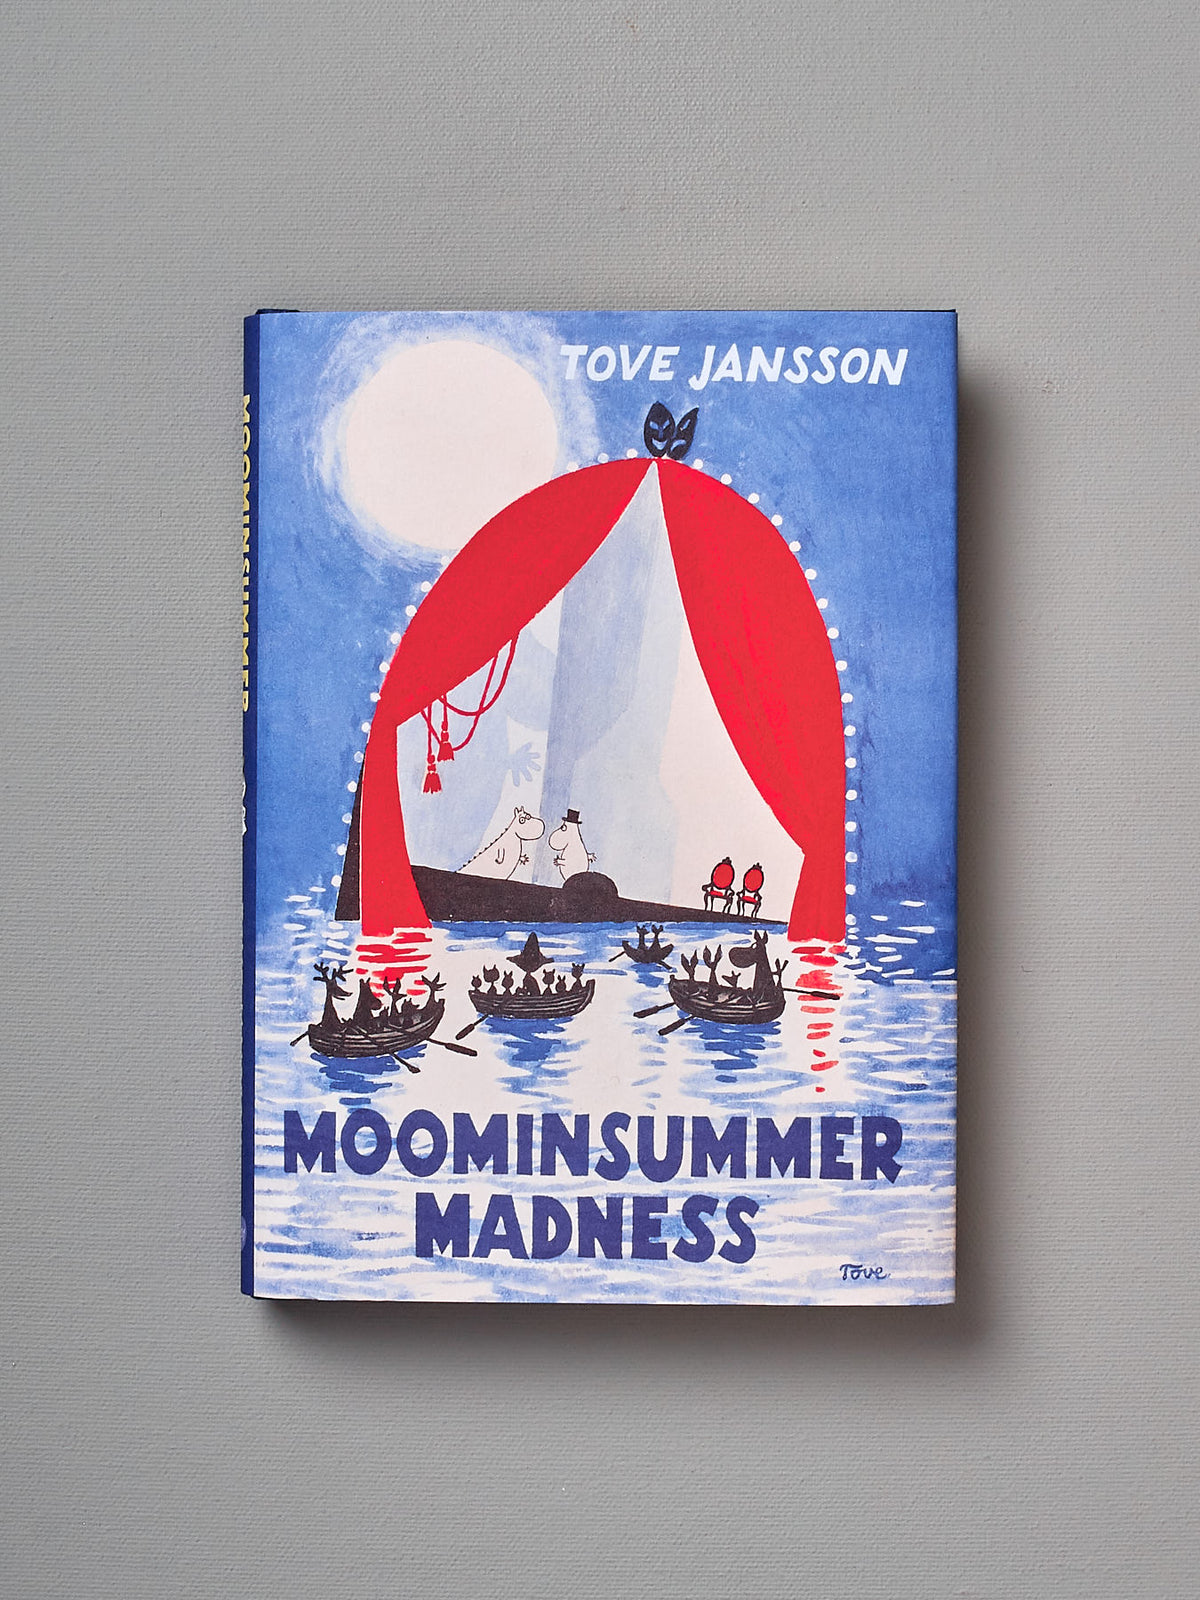 Moominsummer Madness&quot; by Tove Jansson.